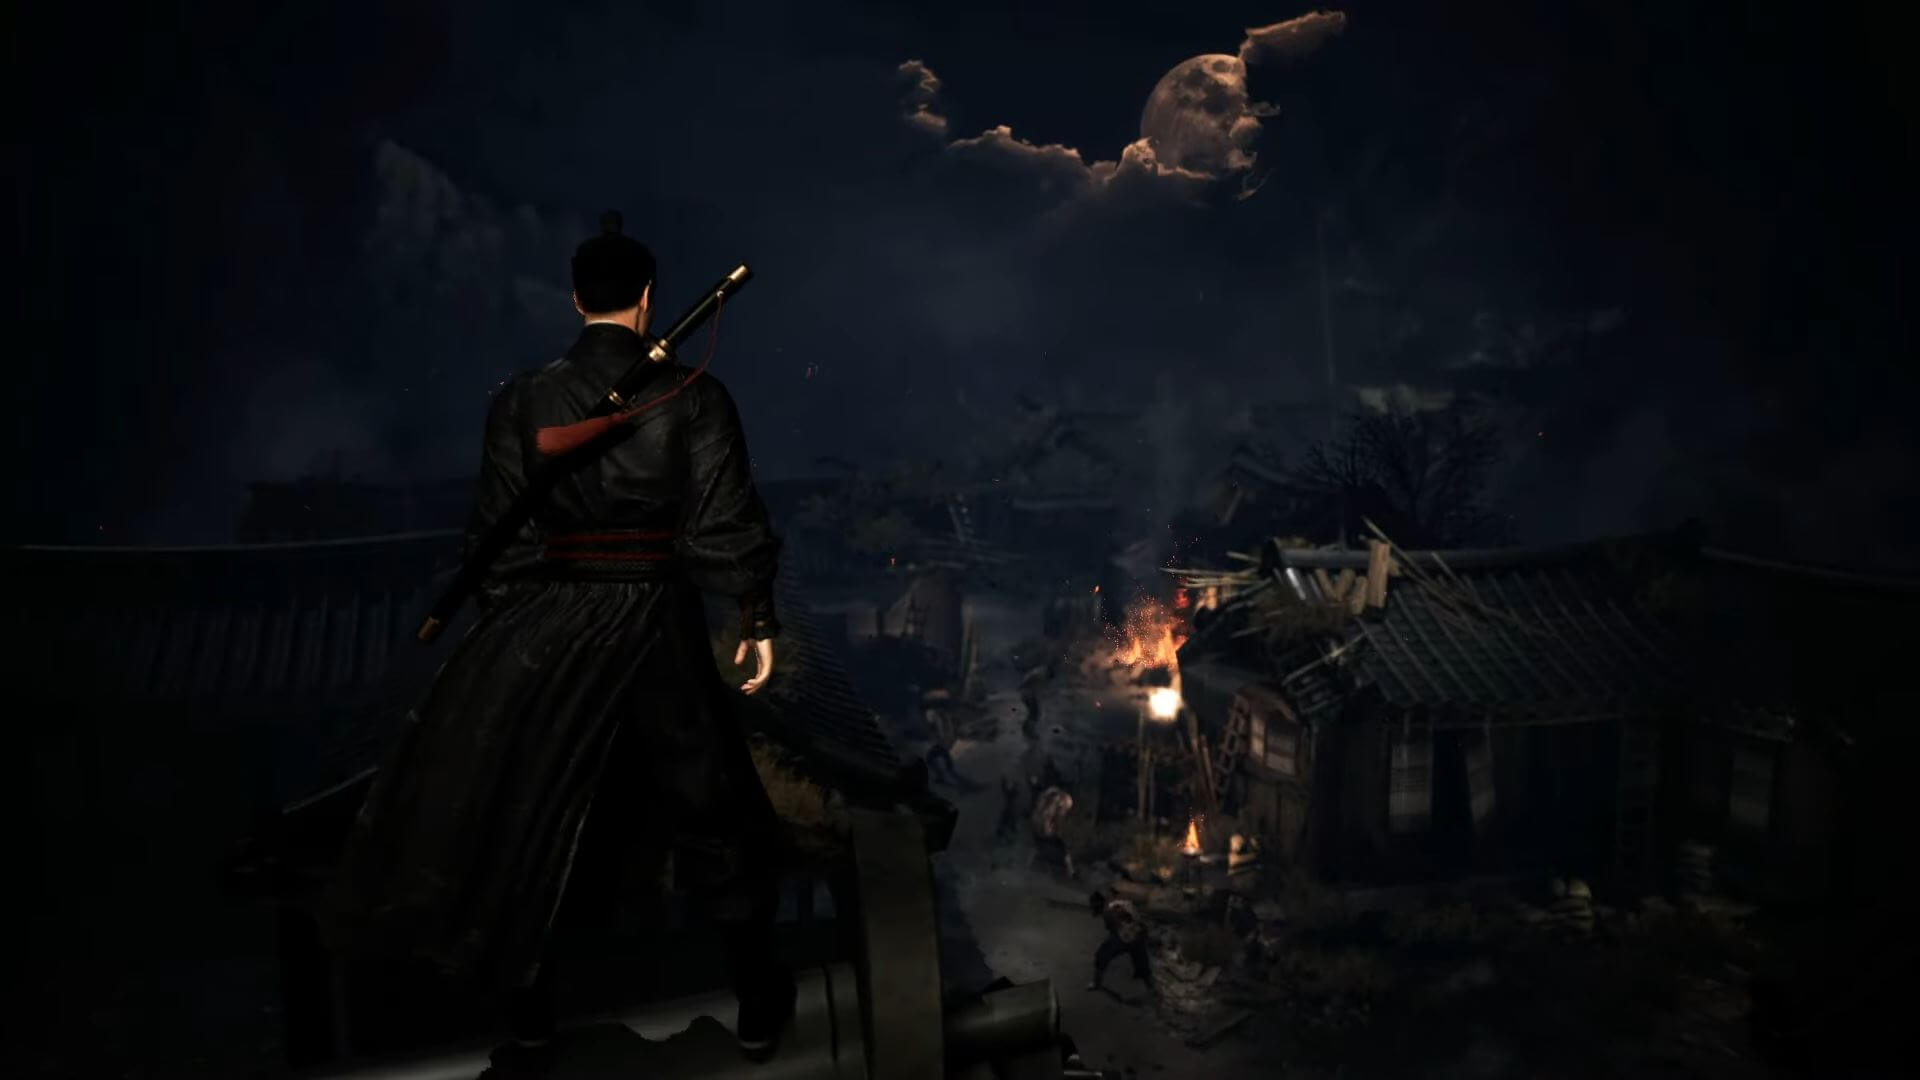 A swordsman looking out over a village in Kingdom: The Blood